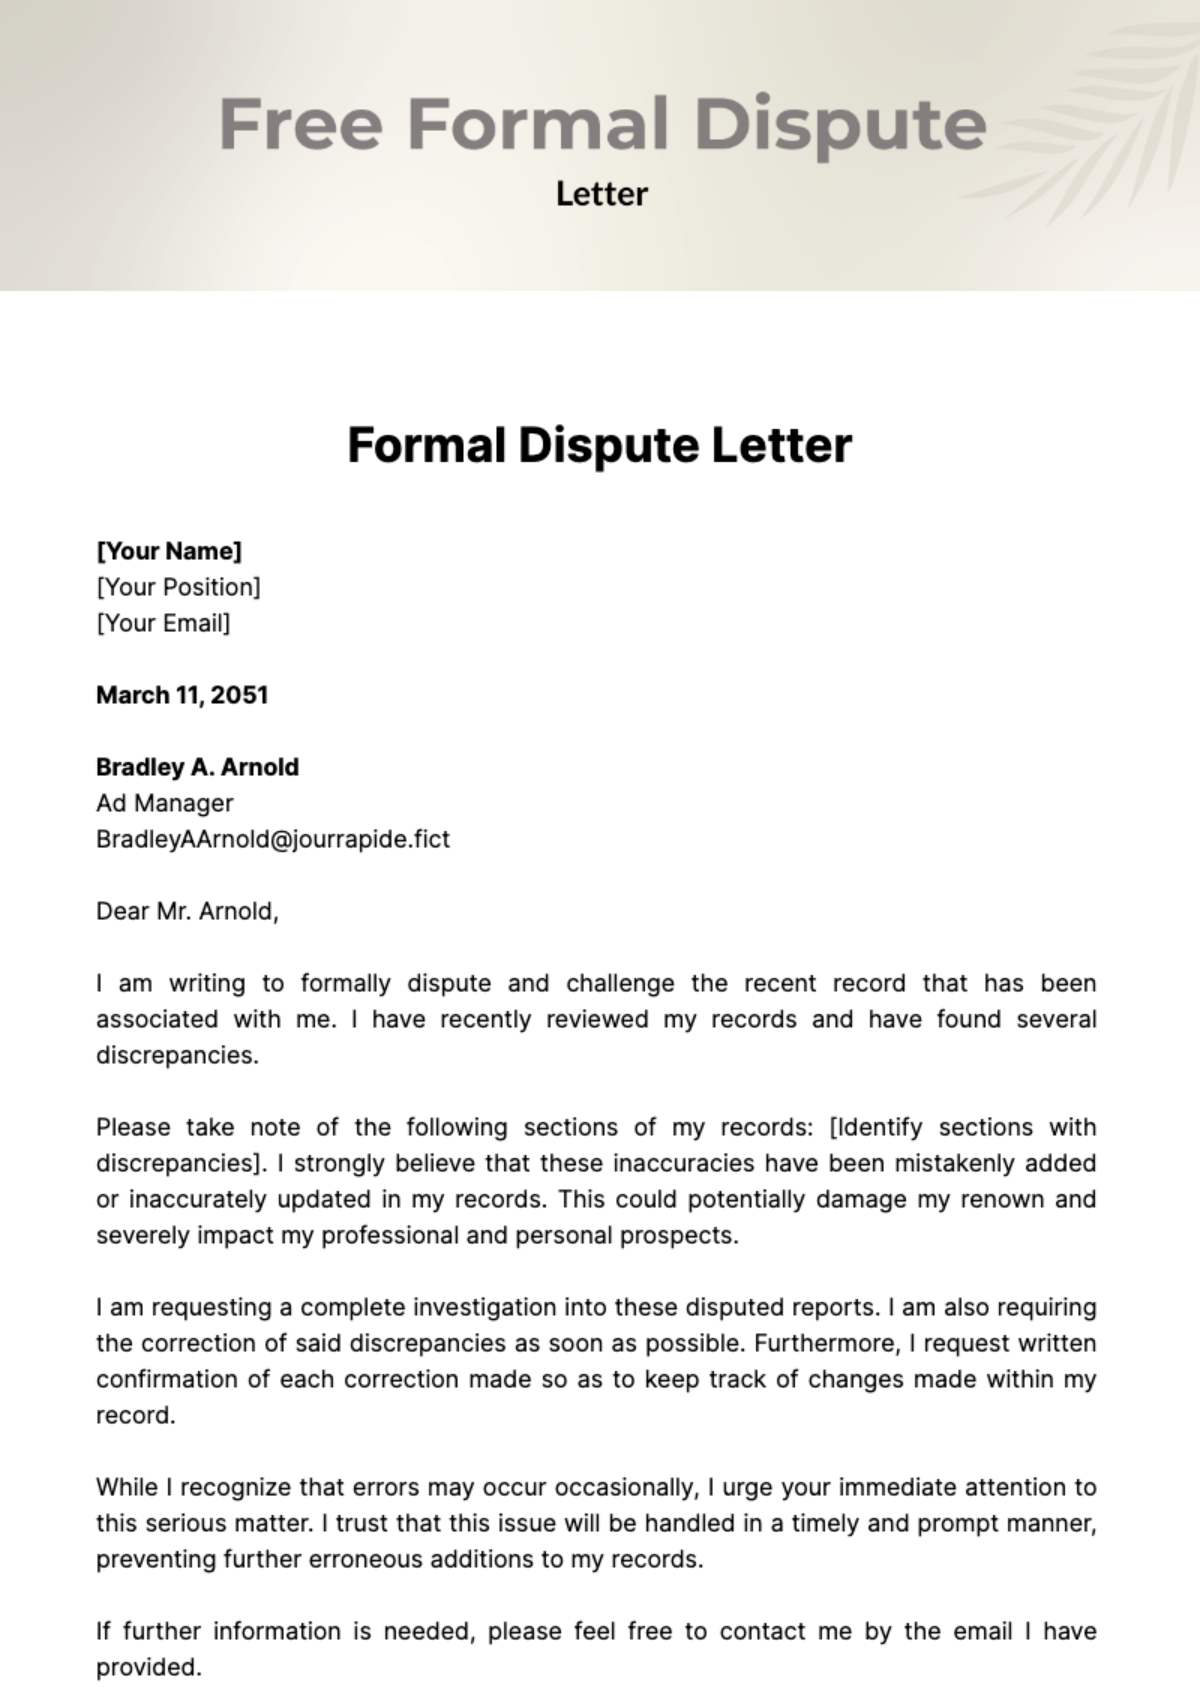 Free Formal Dispute Letter Template